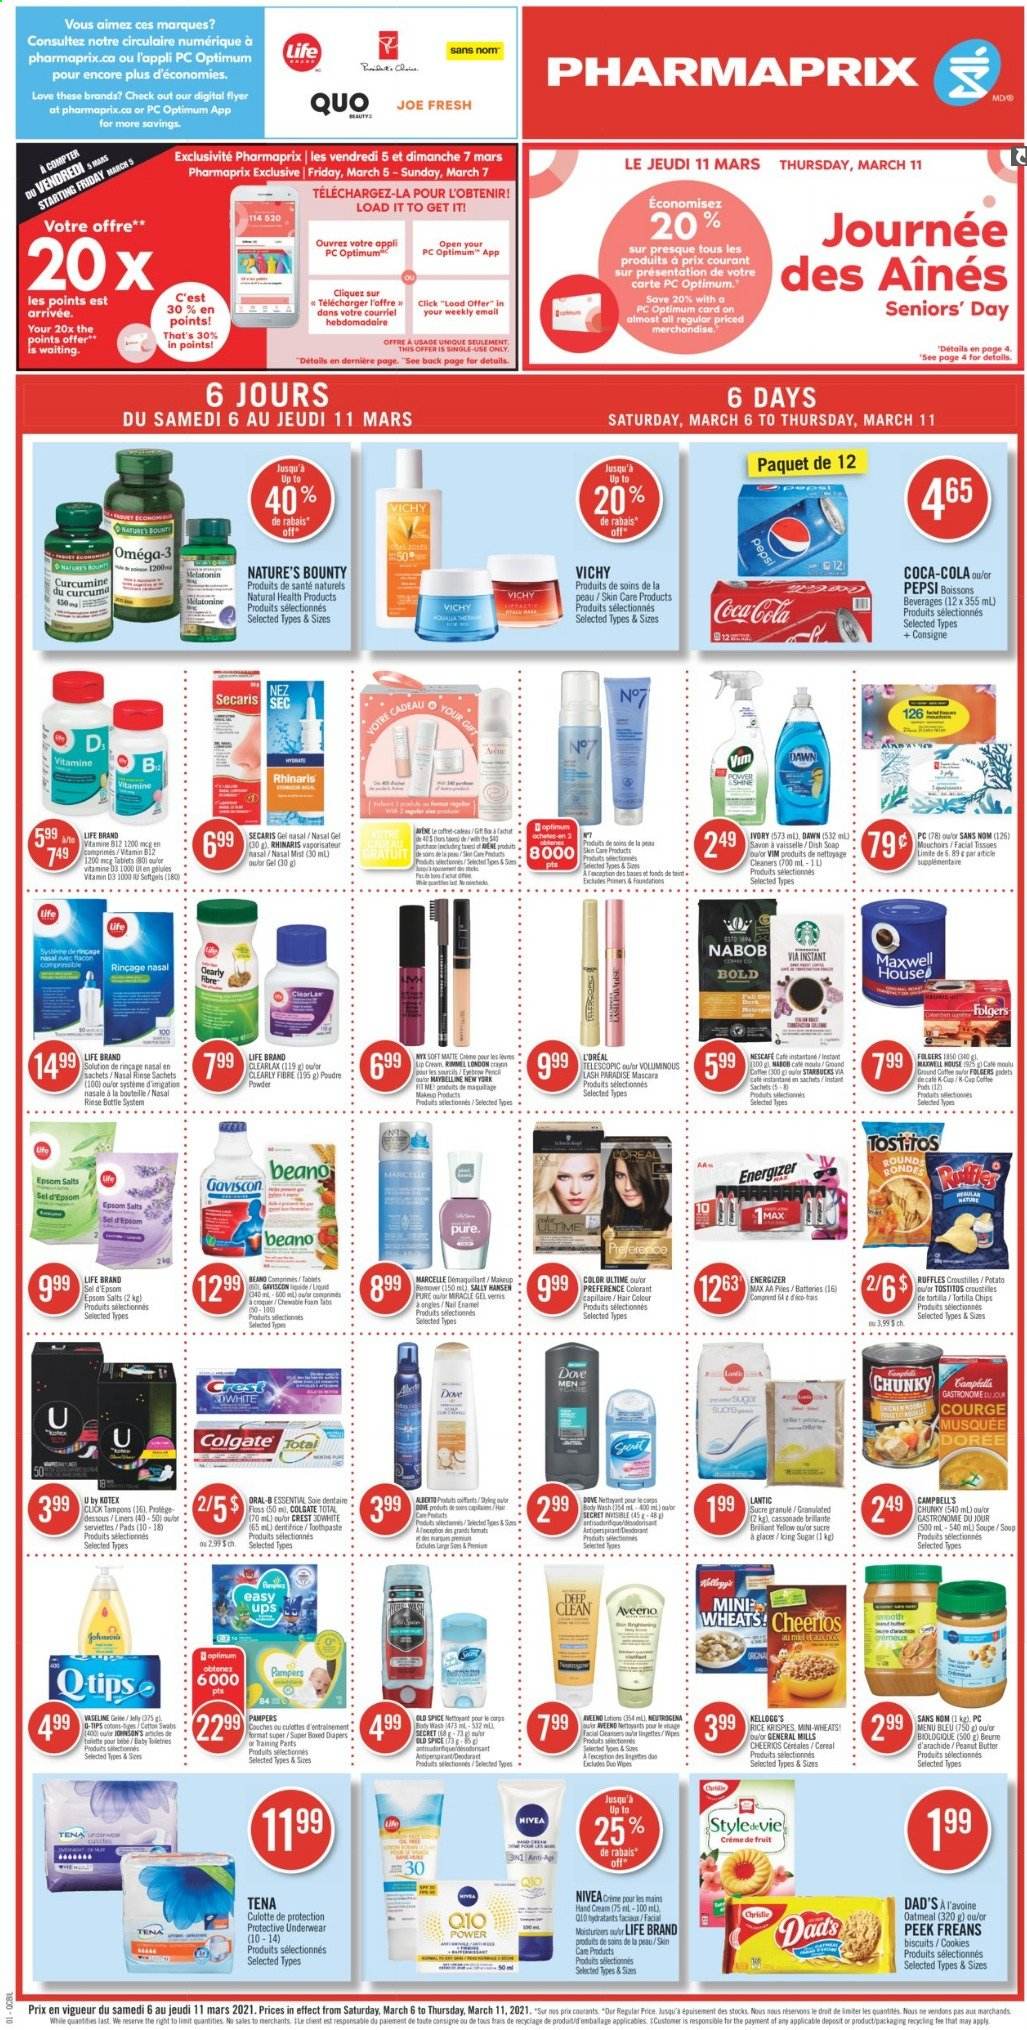 thumbnail - Circulaire Pharmaprix - 06 Mars 2021 - 11 Mars 2021 - Produits soldés - courge, biscuits, cookies, chips, tortilla chips, curcuma, Coca-Cola, Pepsi, Starbucks, couches, déodorant, cassonade, dentifrice, mouchoirs, Kellogg's, sel, lingettes, Colgate, Dove, Energizer, Tena, Vichy, sucre, Maybelline, Nescafé, Neutrogena, Nivea, Old Spice, Oral-b, Pampers, Sally Hansen, mascara, vernis à ongles. Page 1.